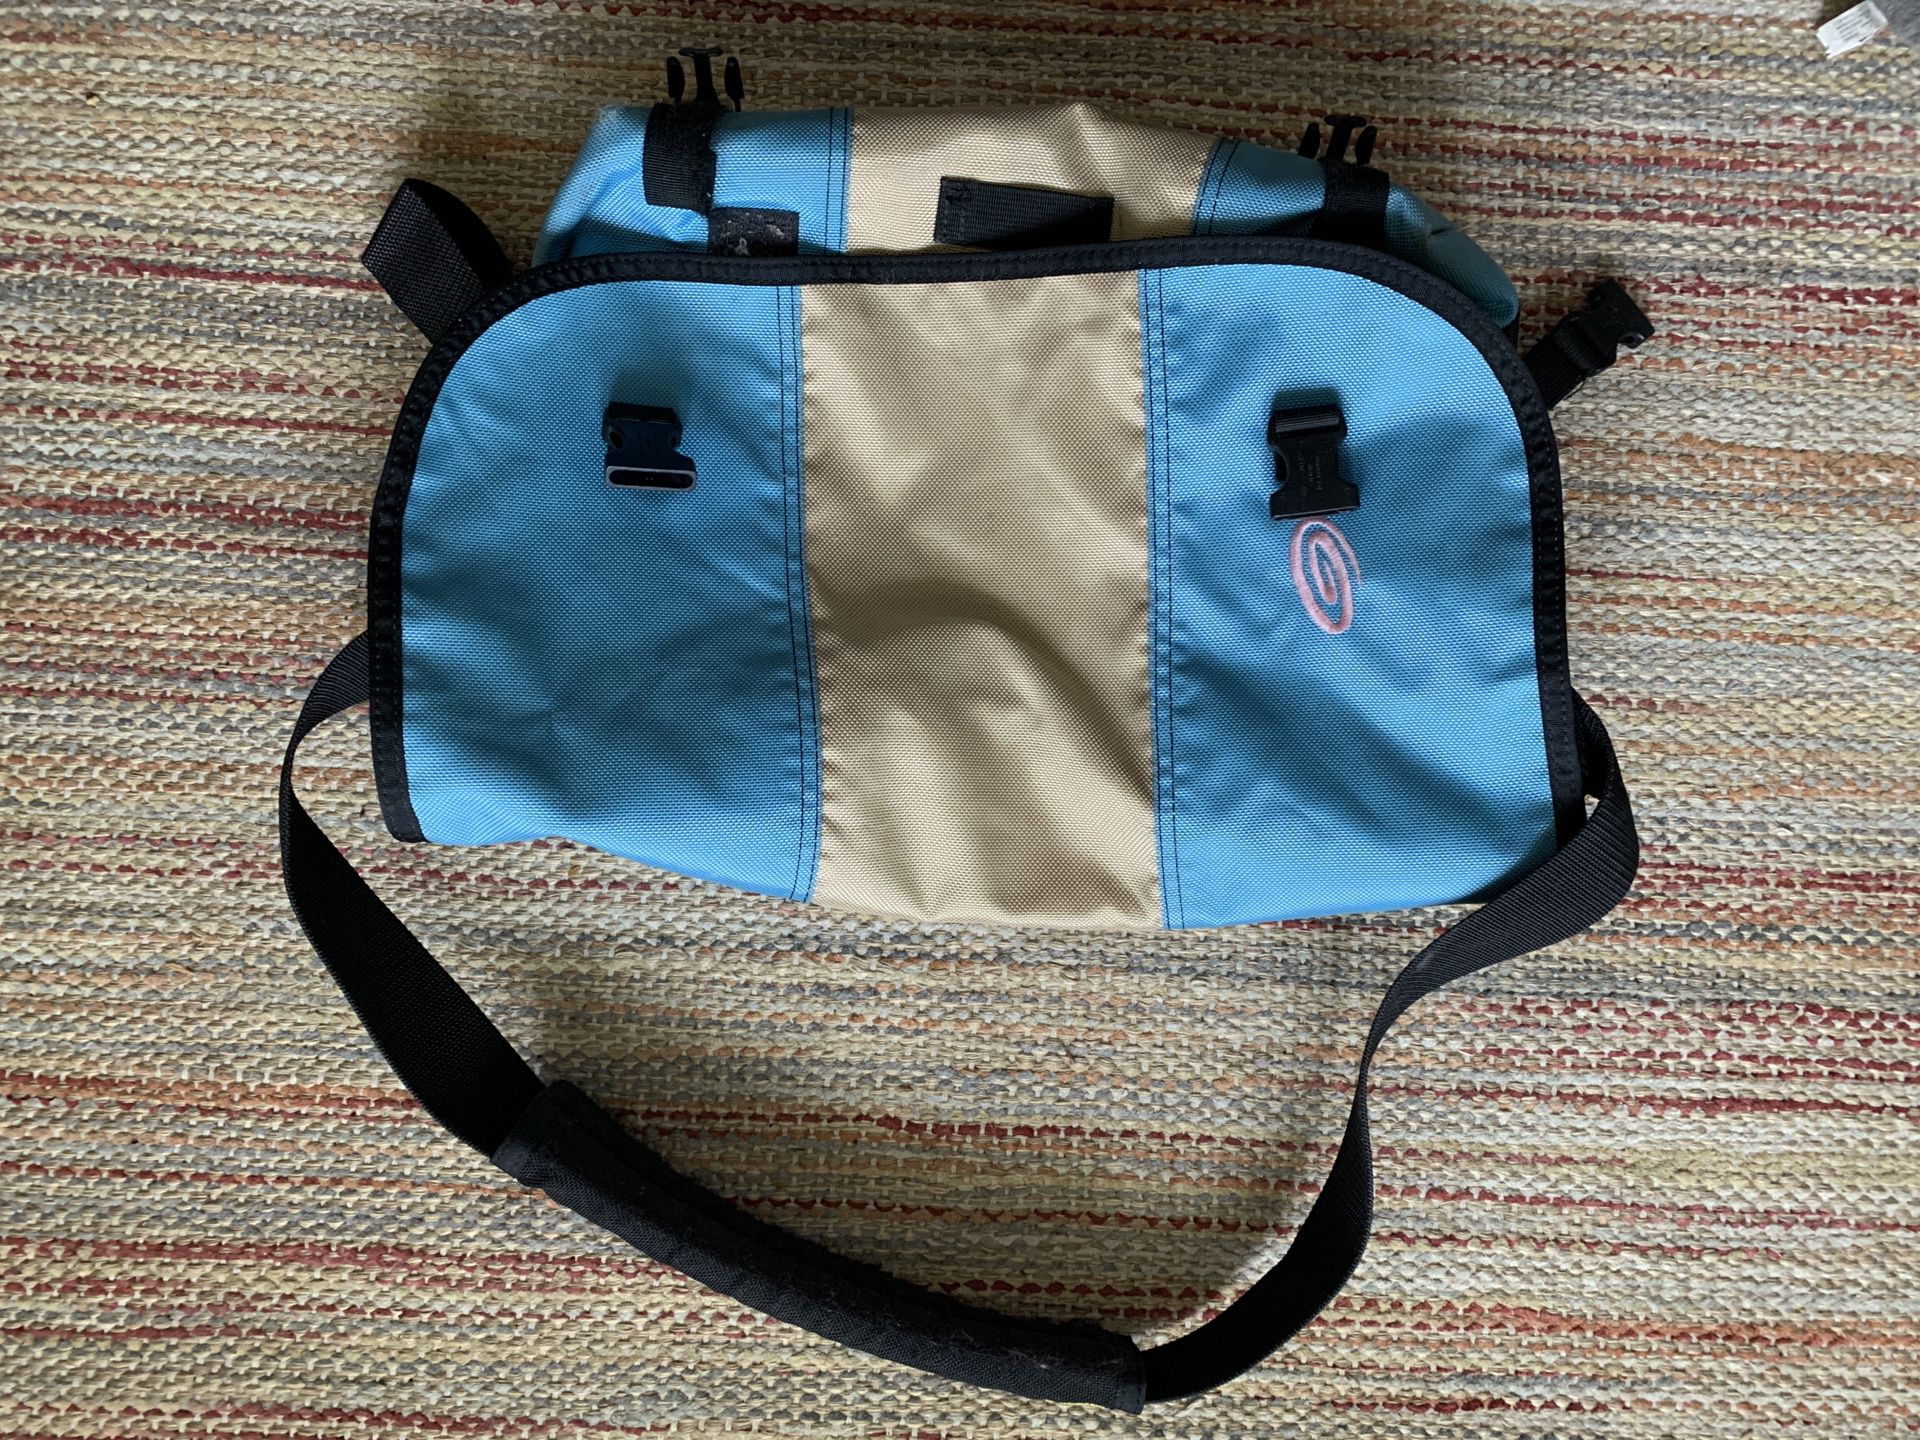 Timbuk2 classic messenger bag - gently used (OBO)